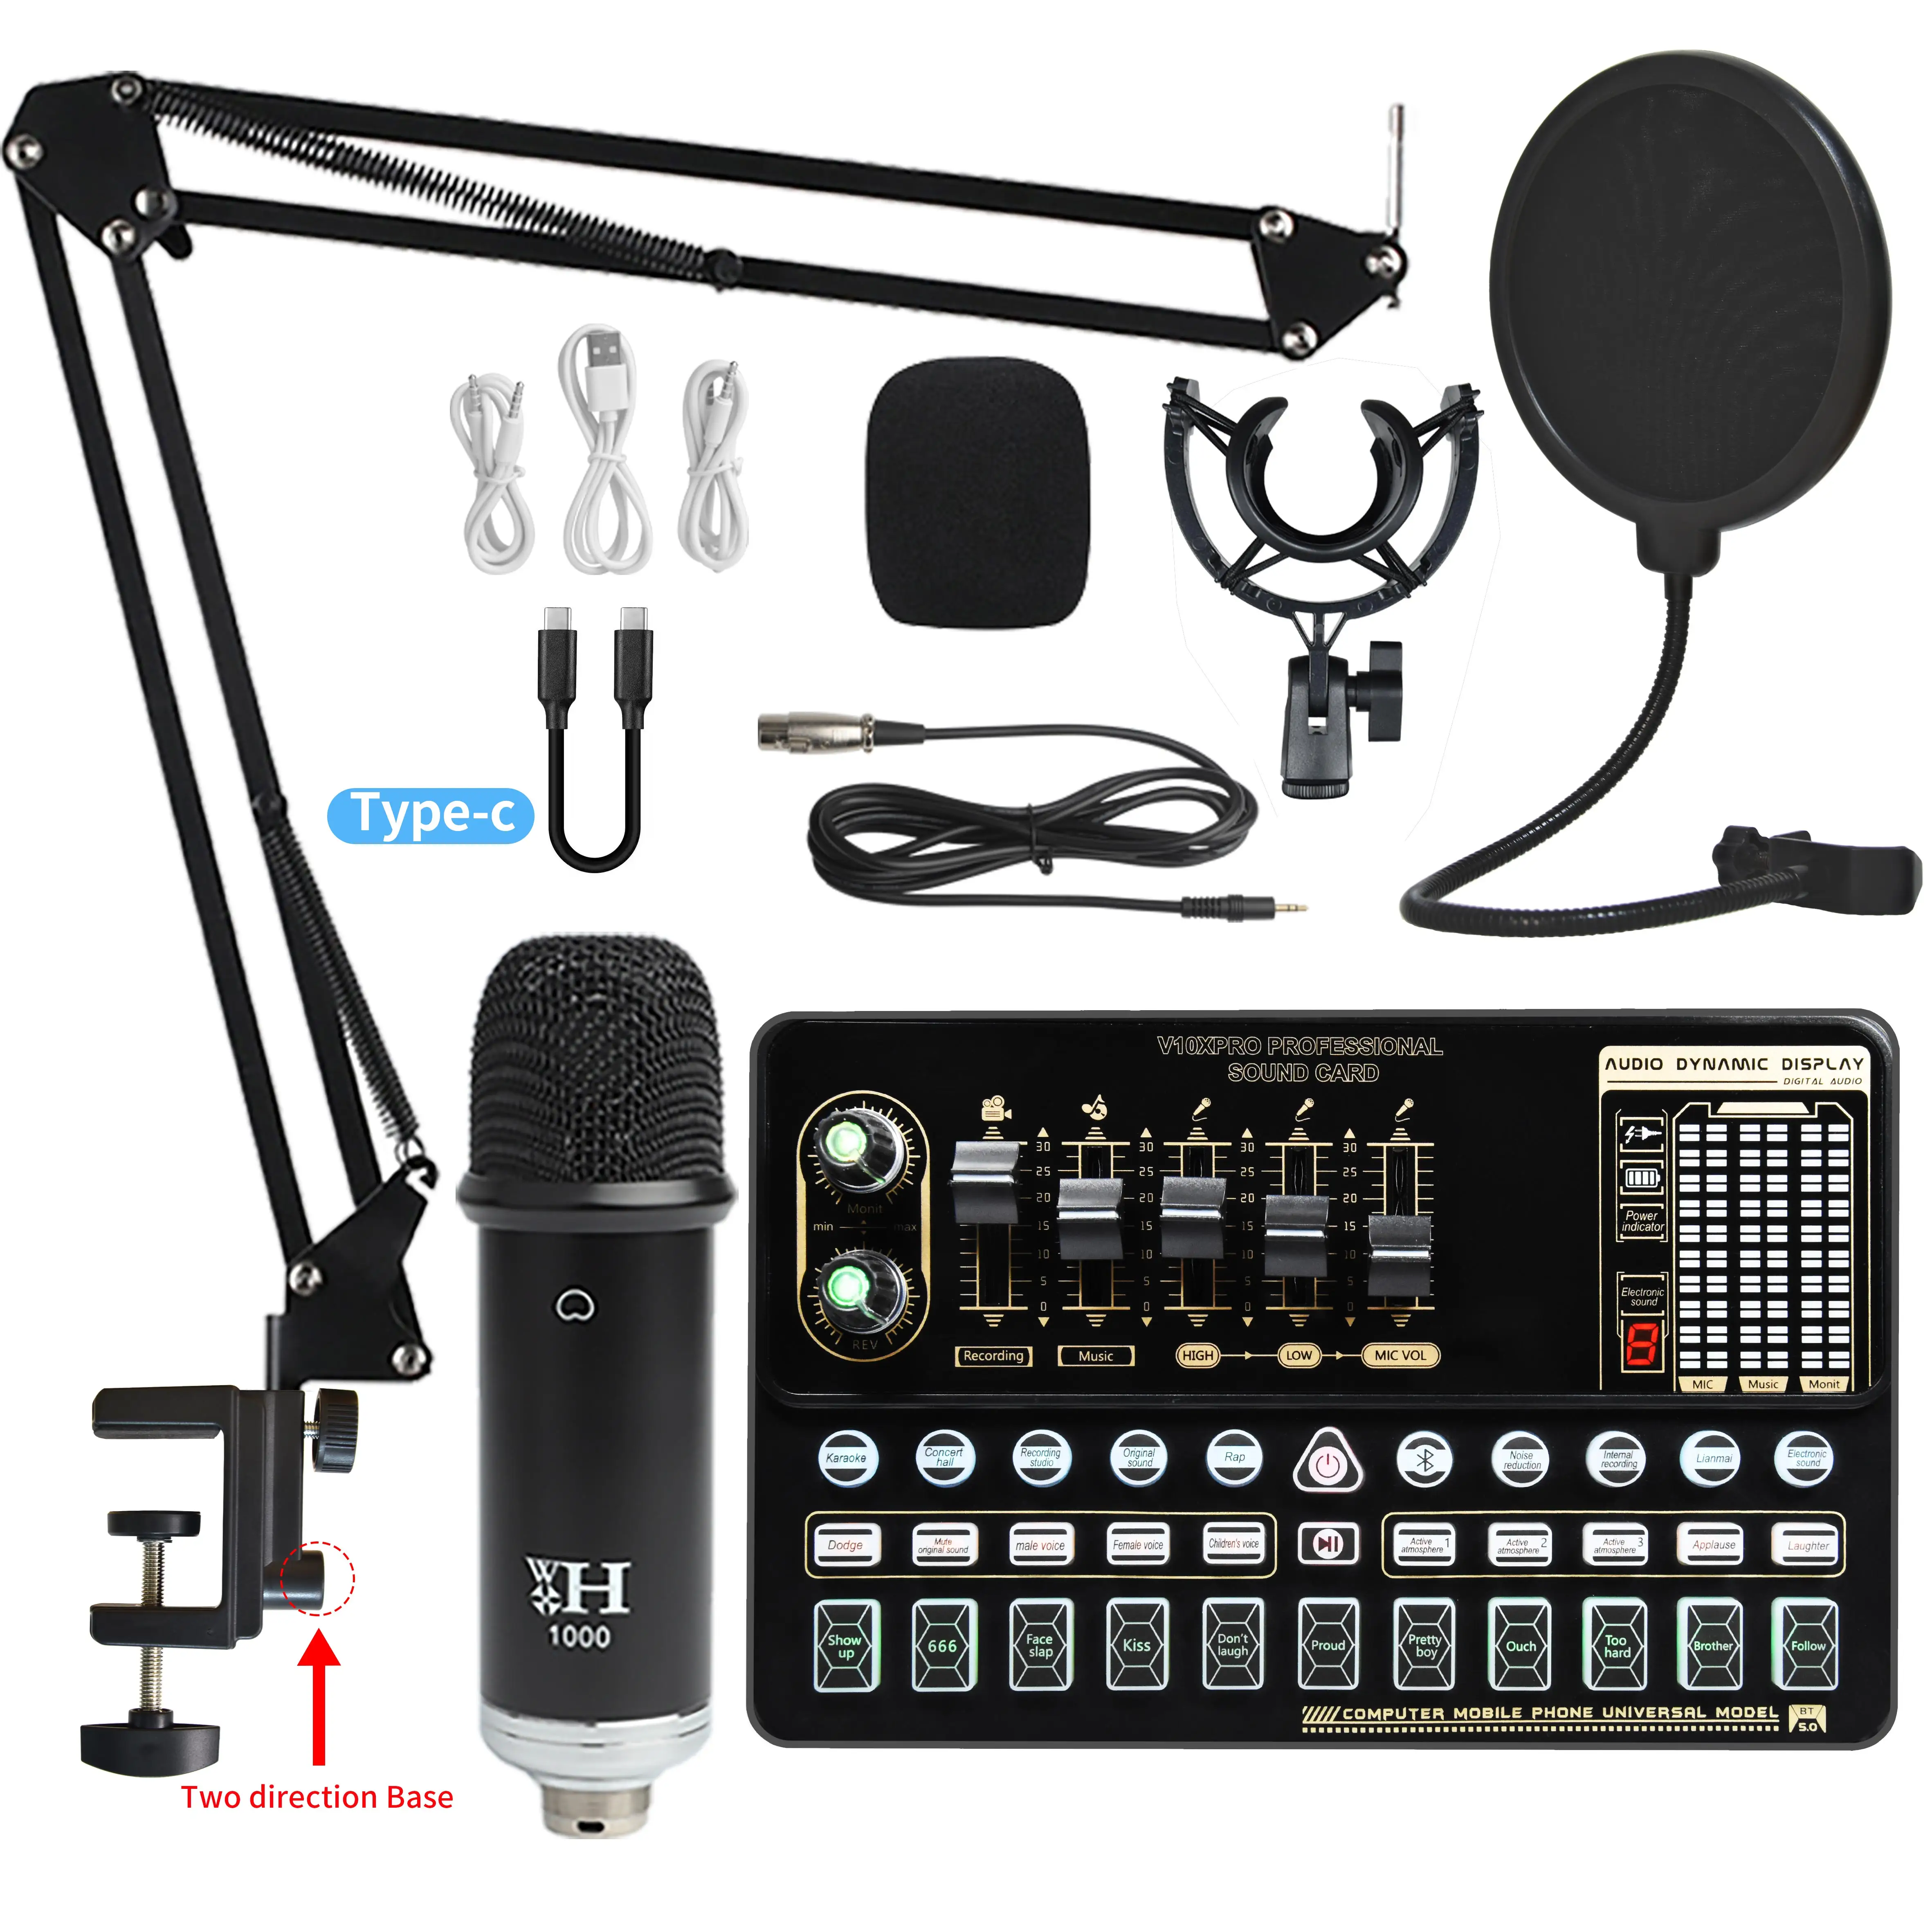 Podcast Equipment Bundle WH1000 Recording Studio Package with Voice Changer Live Sound Card Audio Interface for Laptop Computer